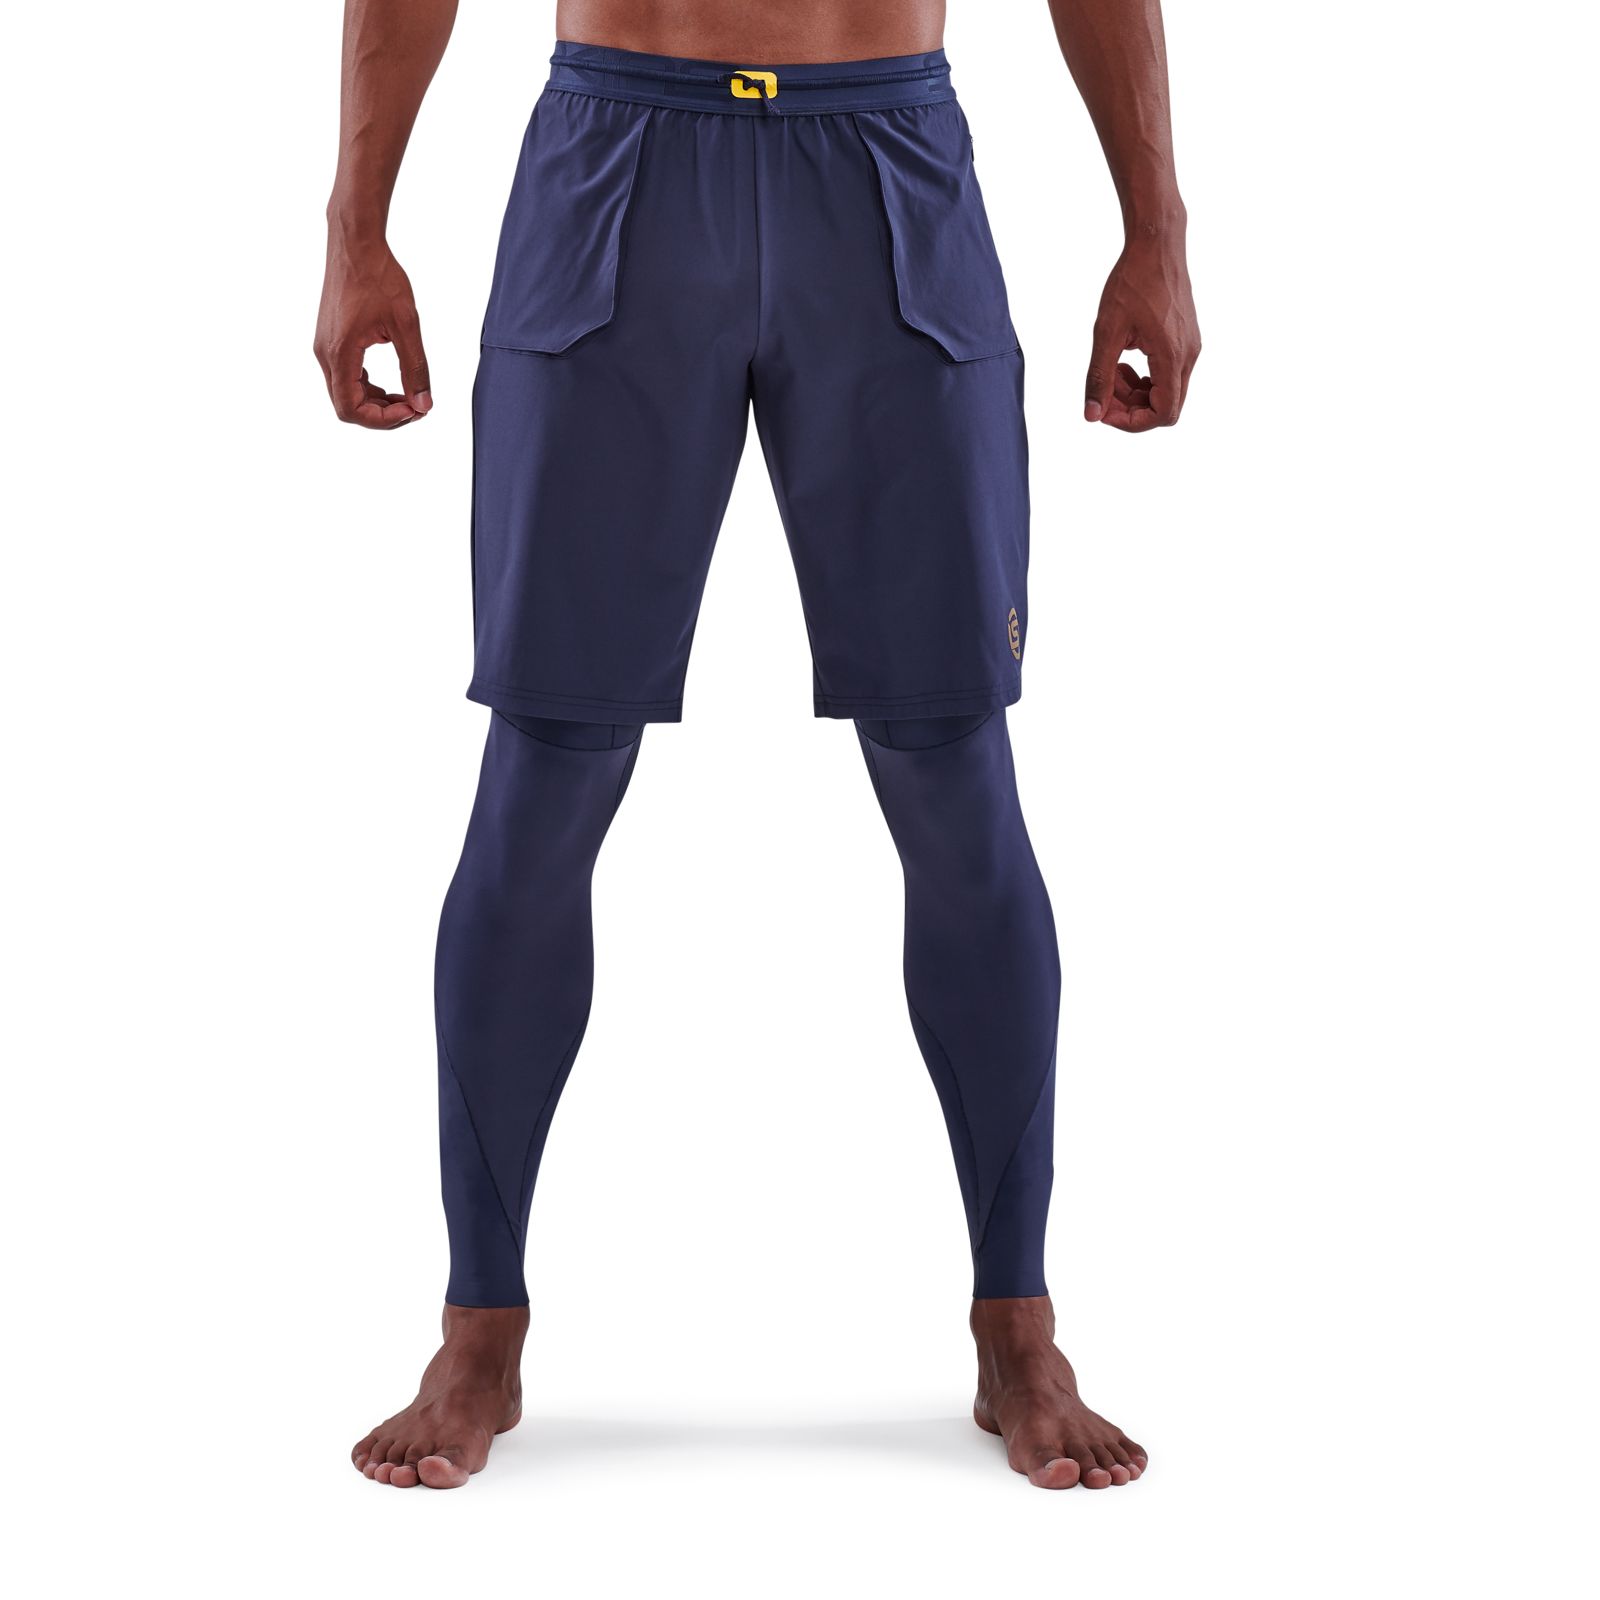 SKINS SERIES-5 MEN'S TRAVEL AND RECOVERY LONG TIGHTS NAVY BLUE